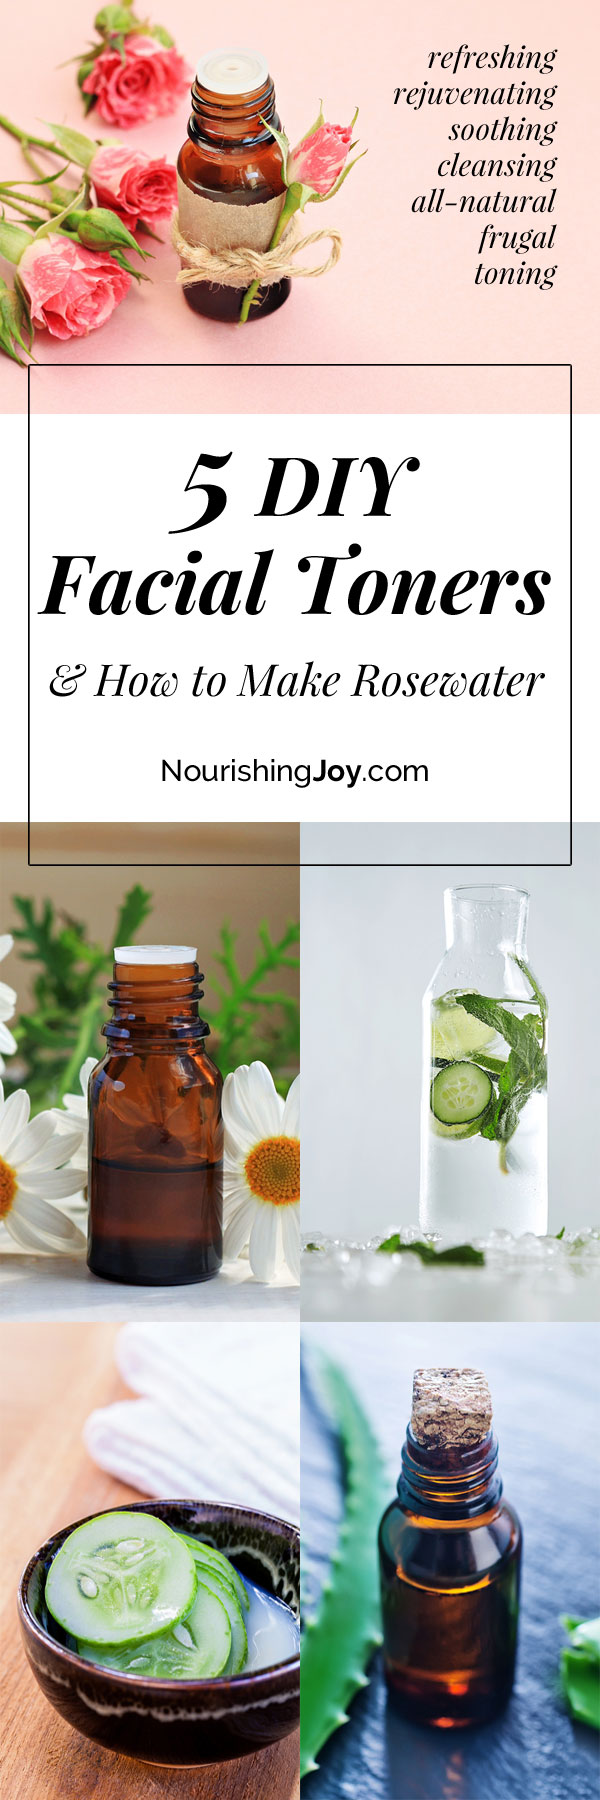 Homemade toners are an easy, frugal, and natural way to care for your skin. And when you make your own rosewater, your kitchen smells heavenly!